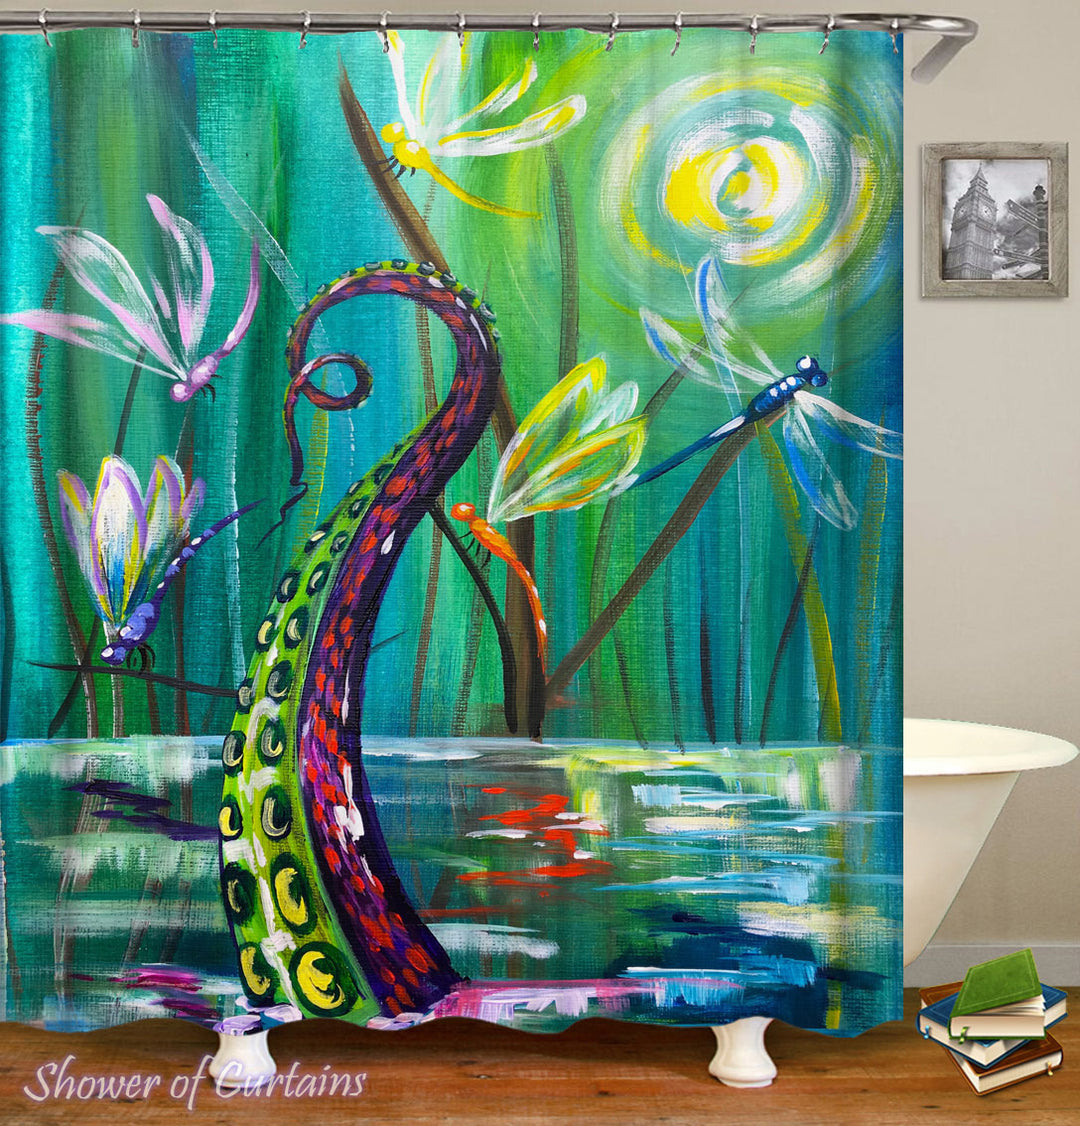 Art Shower Curtain of Dragonflies And Octopus’ Tentacle